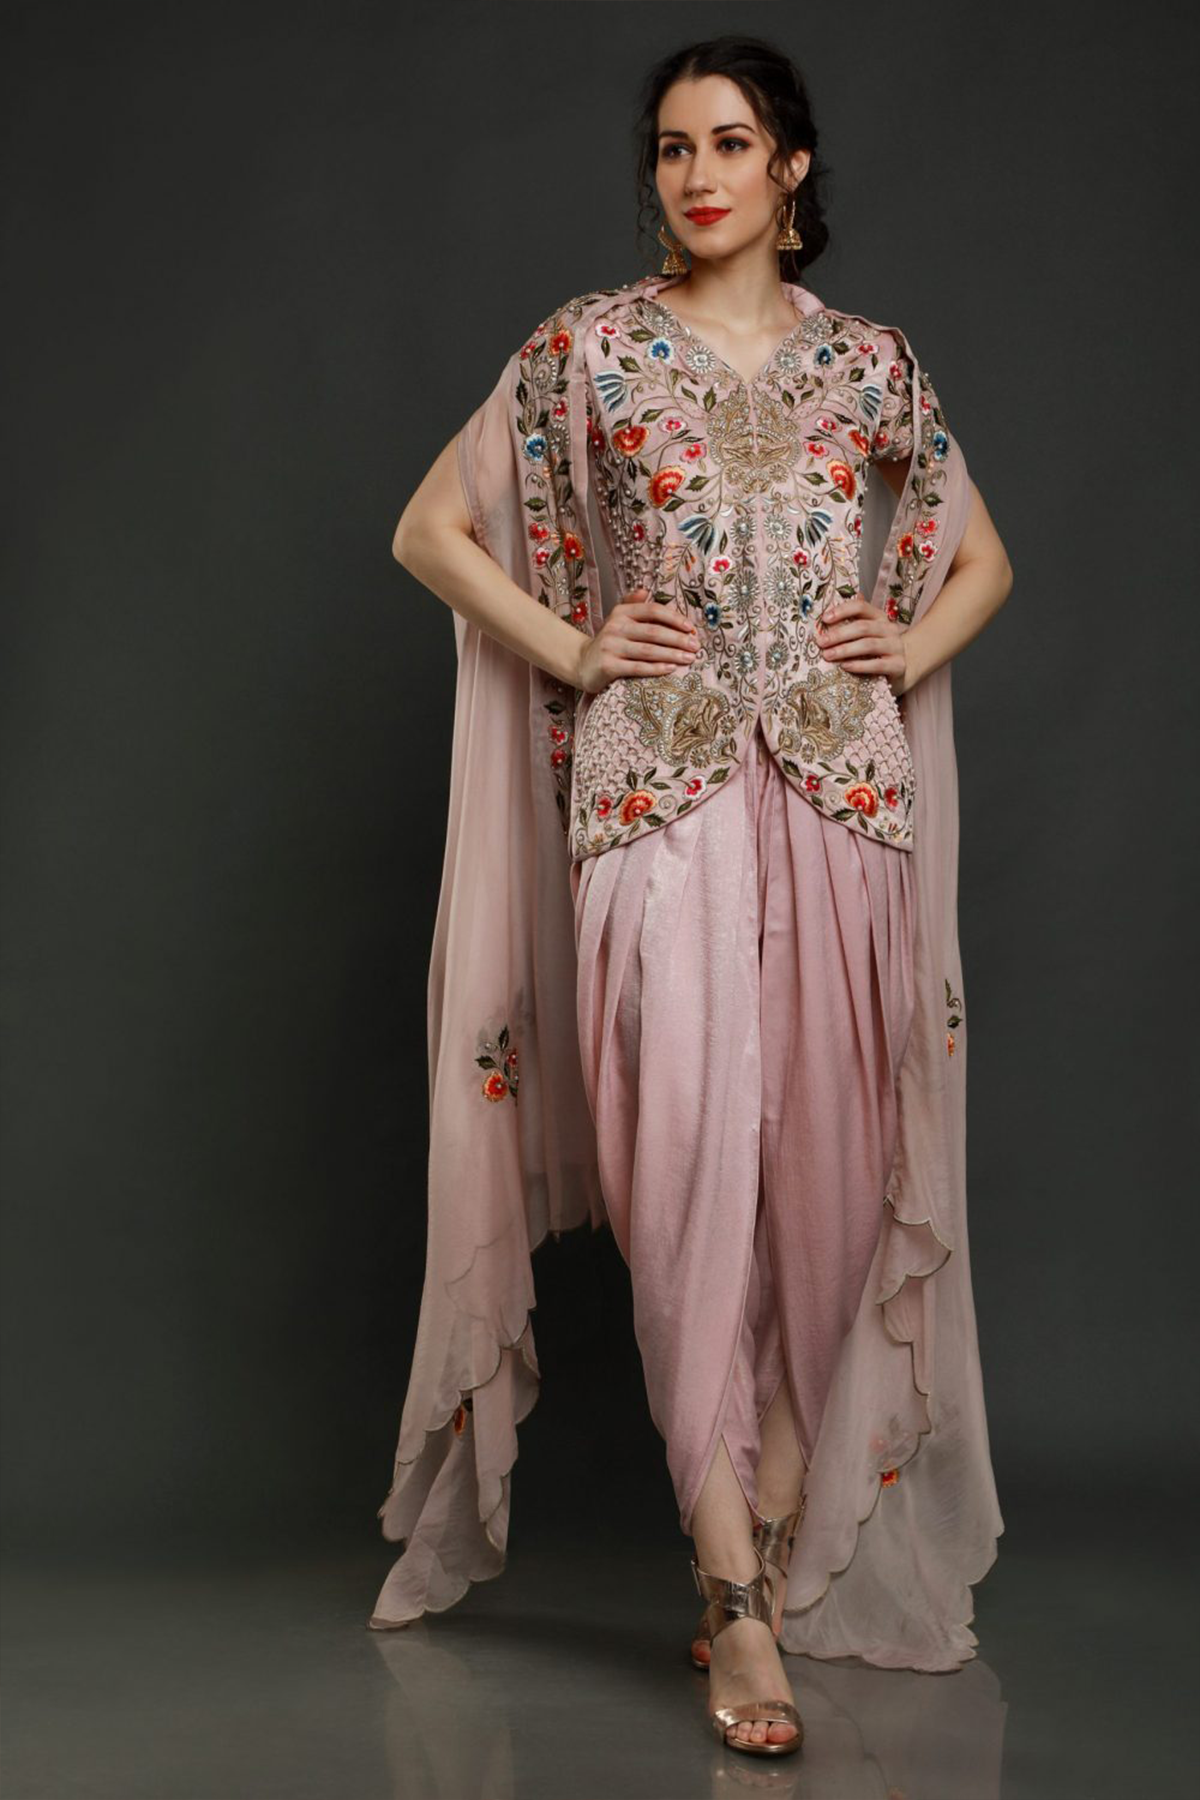 "Elegant Dusky Pink Velvet Crepe Tunic with Intricate Embroidery, paired with Velvet Crepe Dhoti and Organza Dupatta. Shop the luxe ensemble now!"